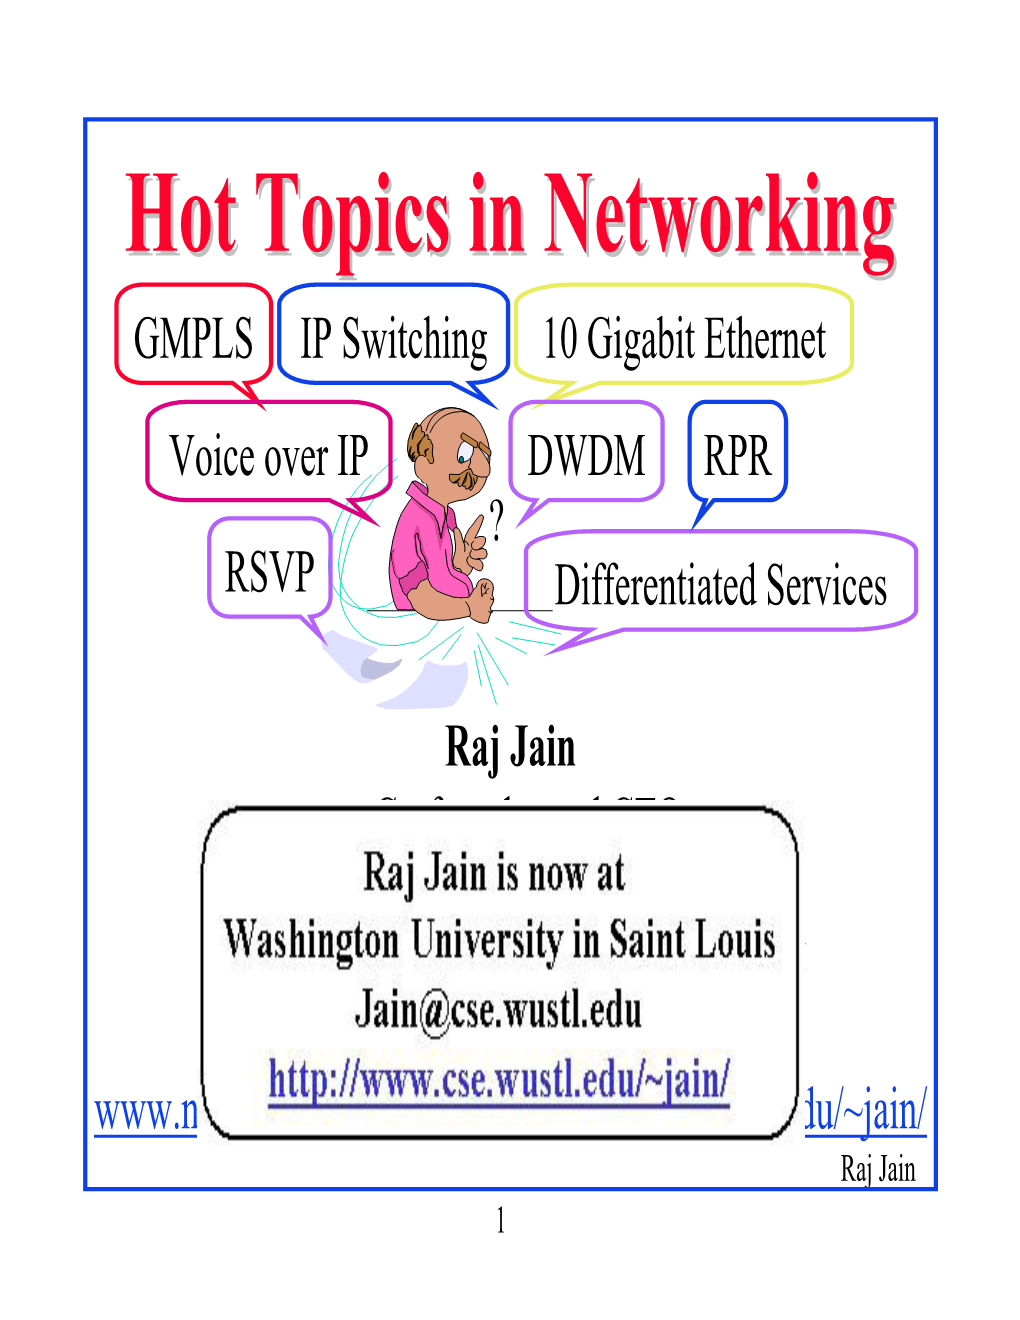 Tutorial on Hot Topics in Networking